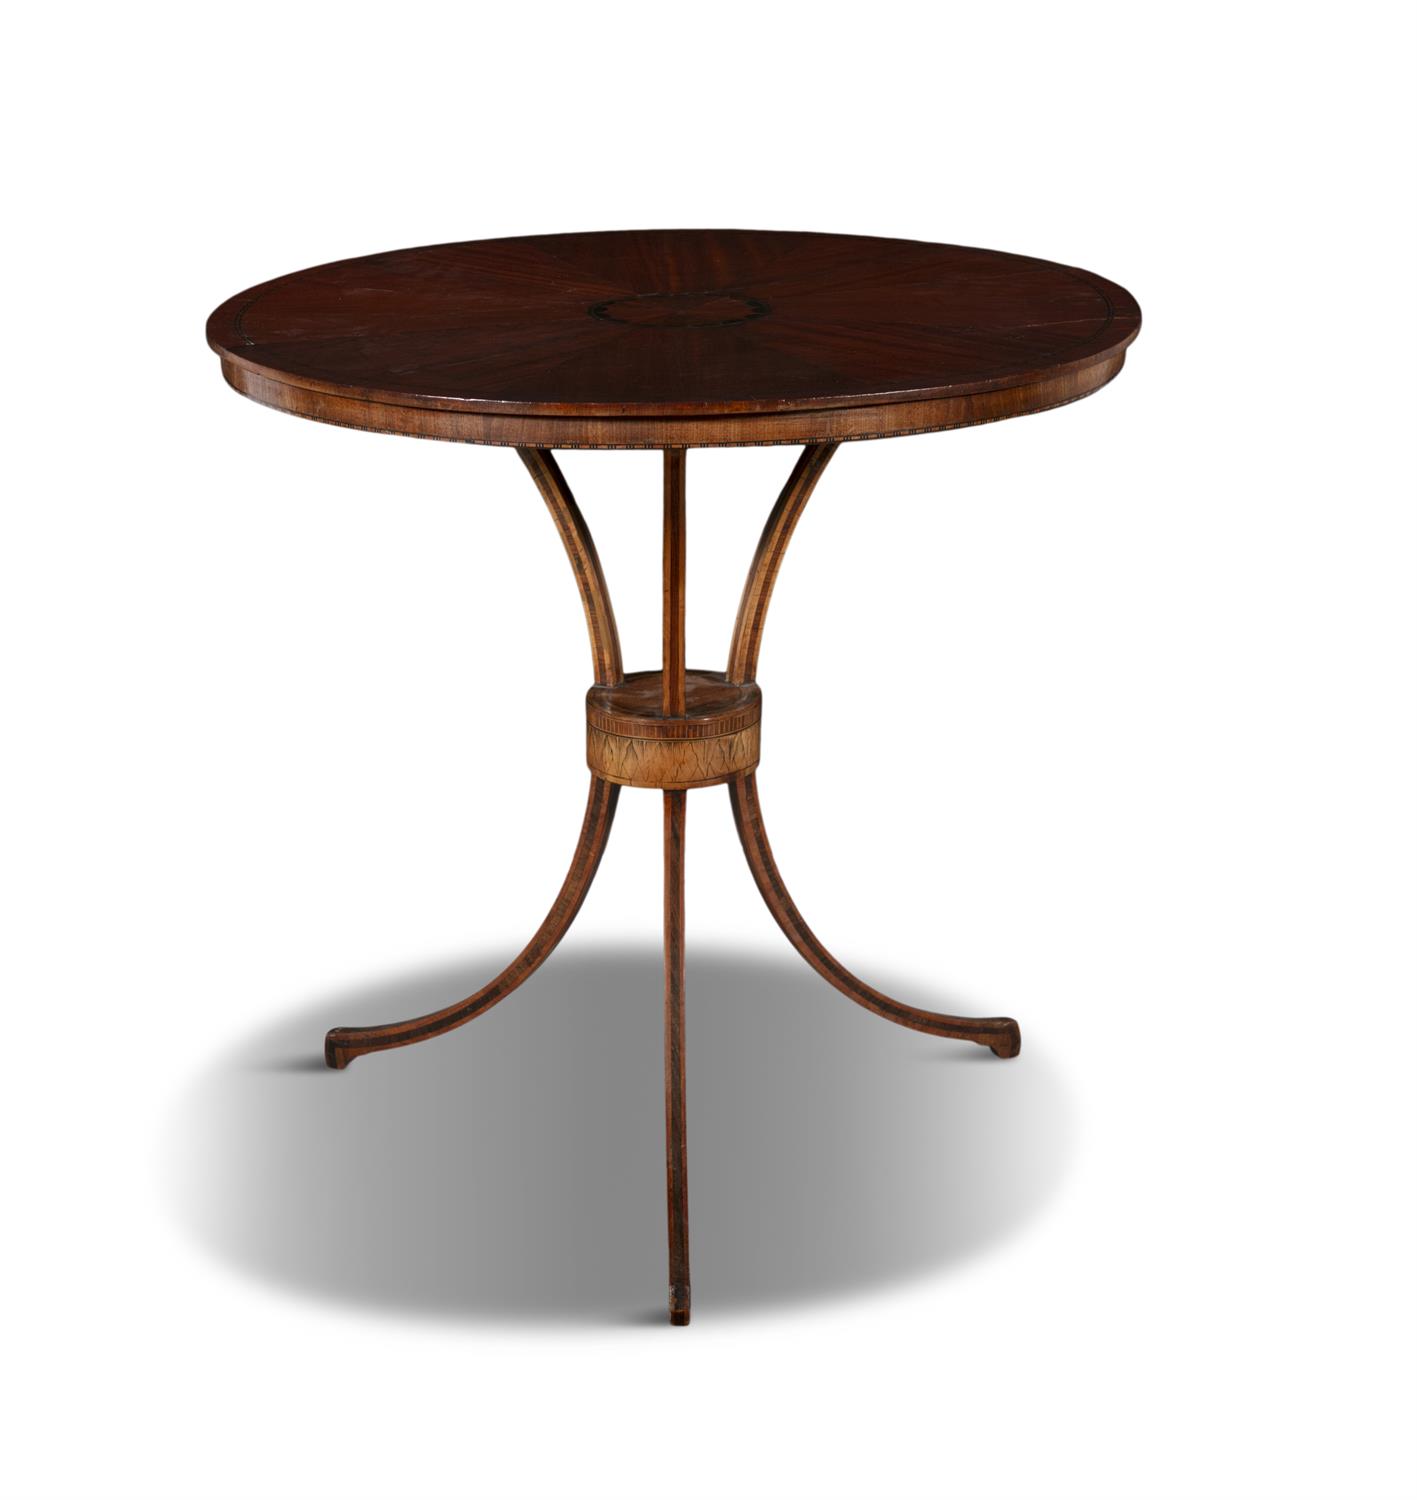 A MAHOGANY AND SATINWOOD INLAID CENTRE TABLE, LATE 18TH CENTURY, the top with central paterae